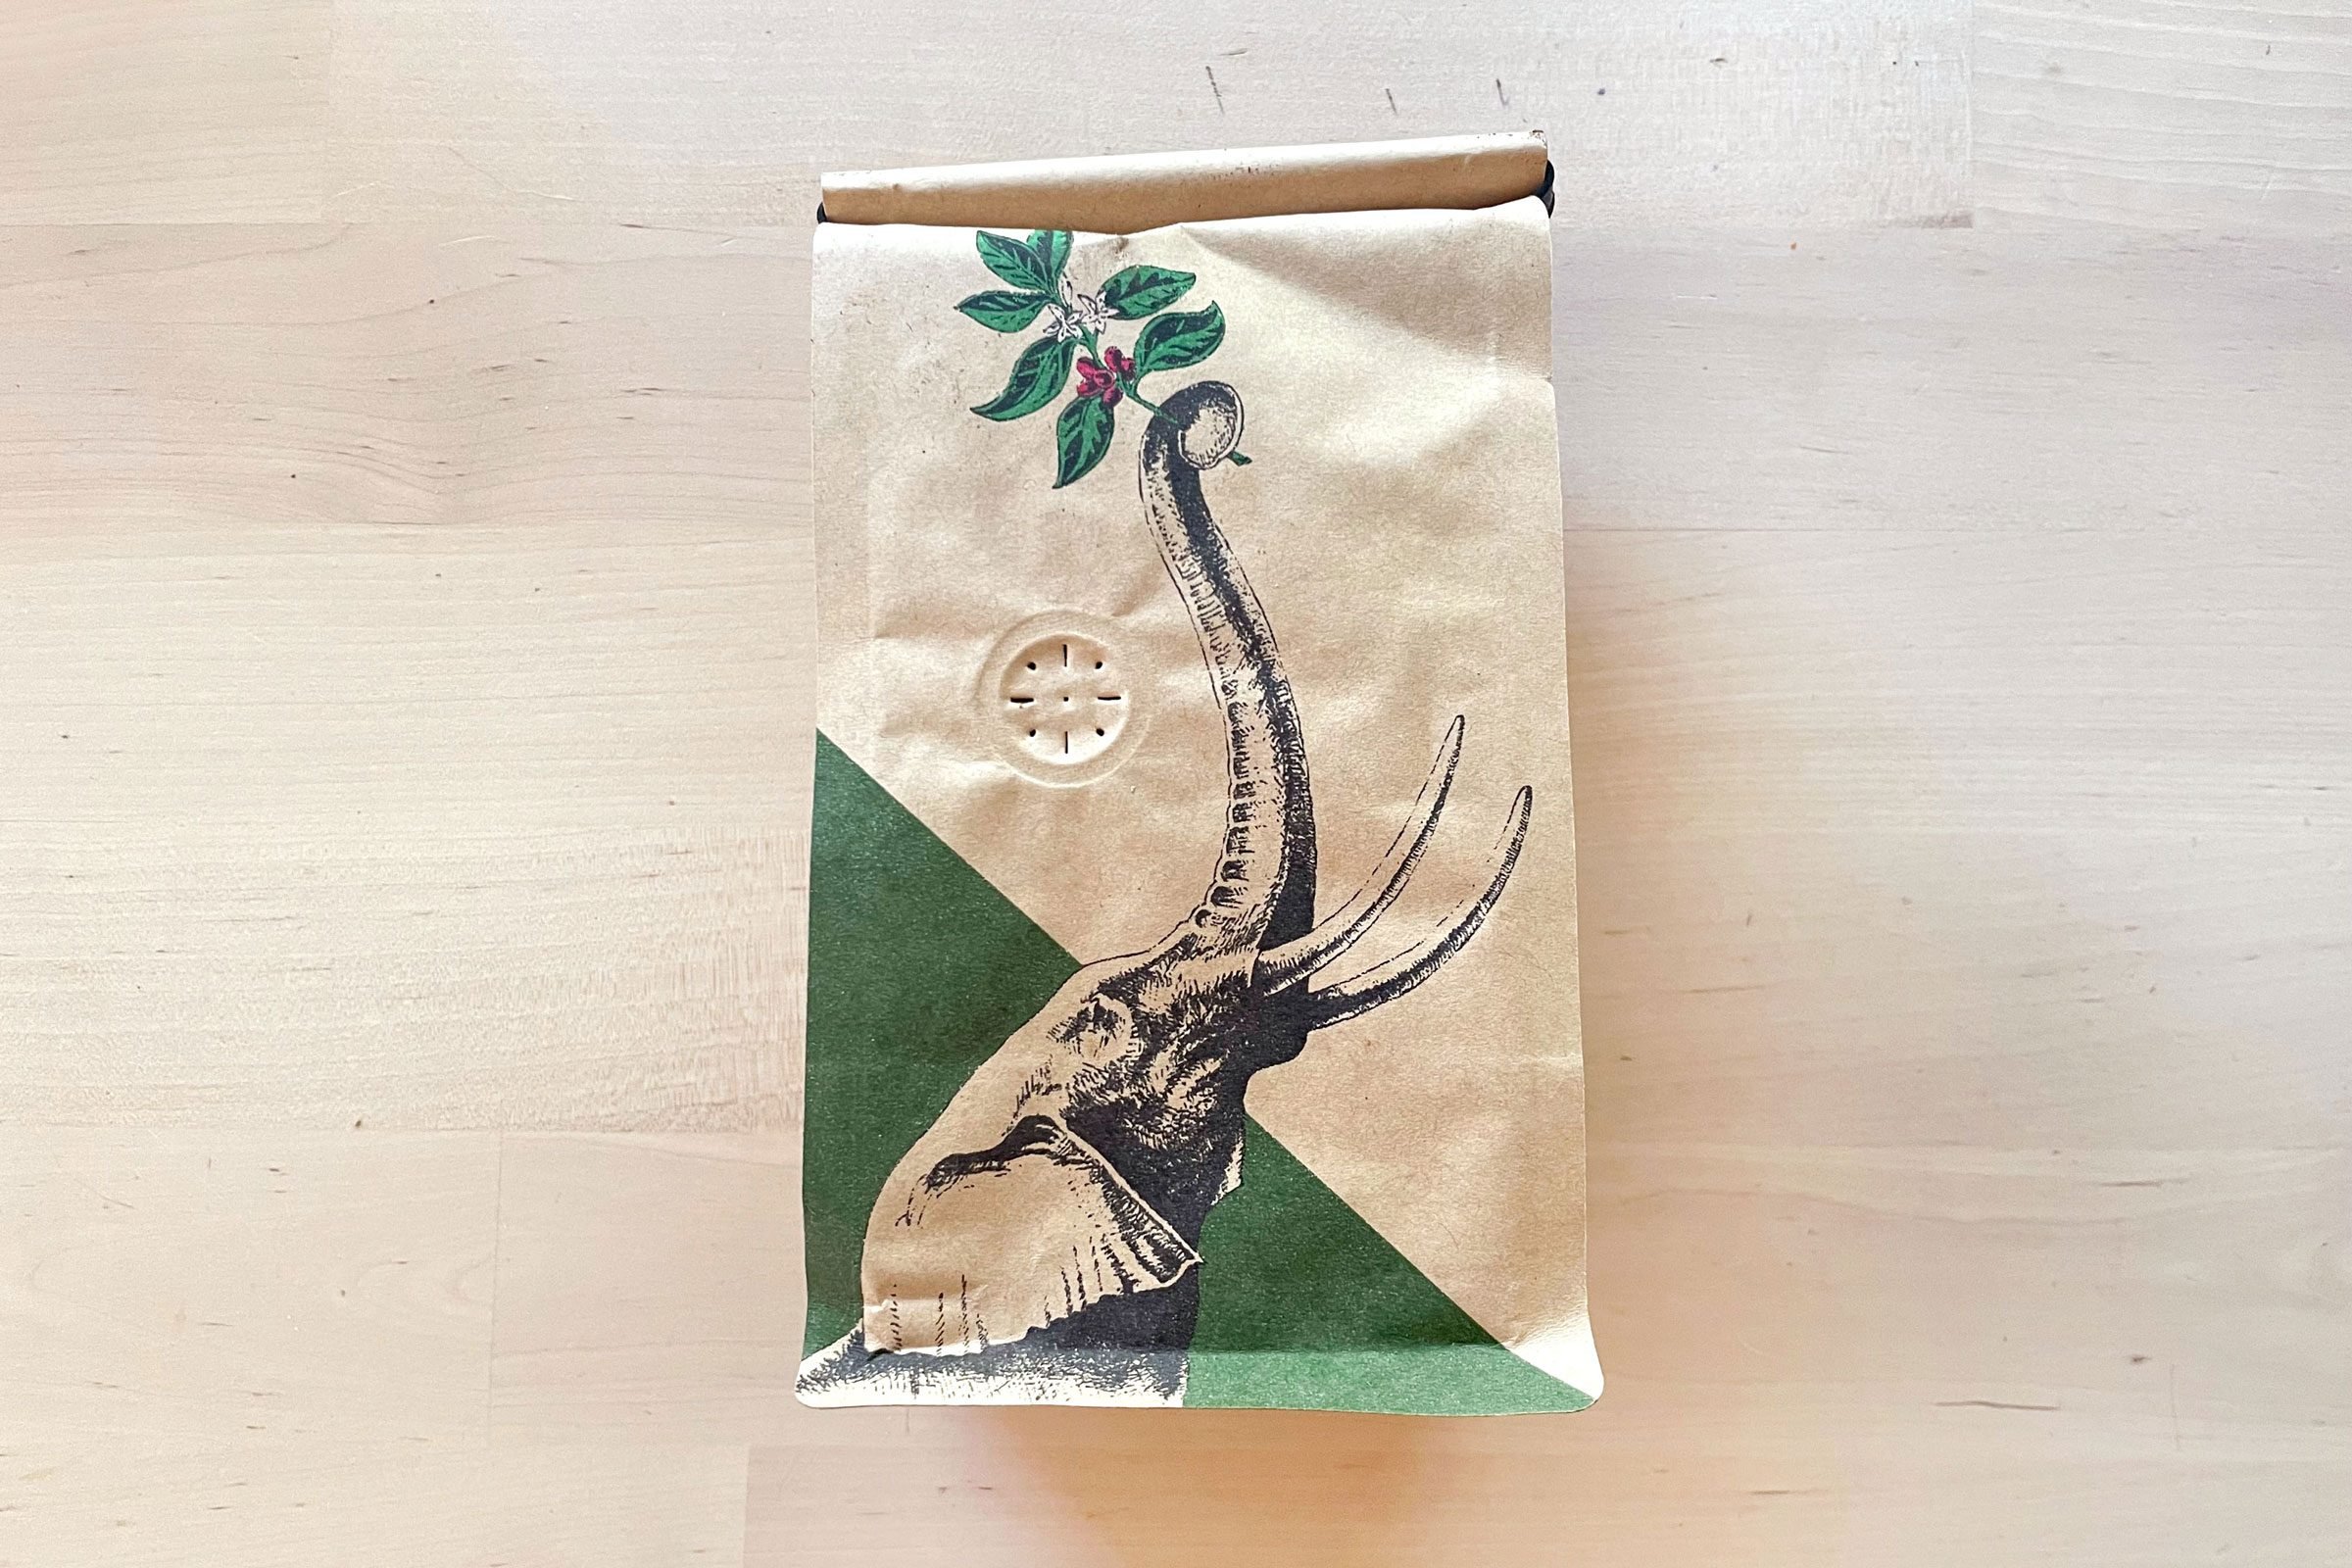 Why Do Coffee Bags Have Holes in Them?